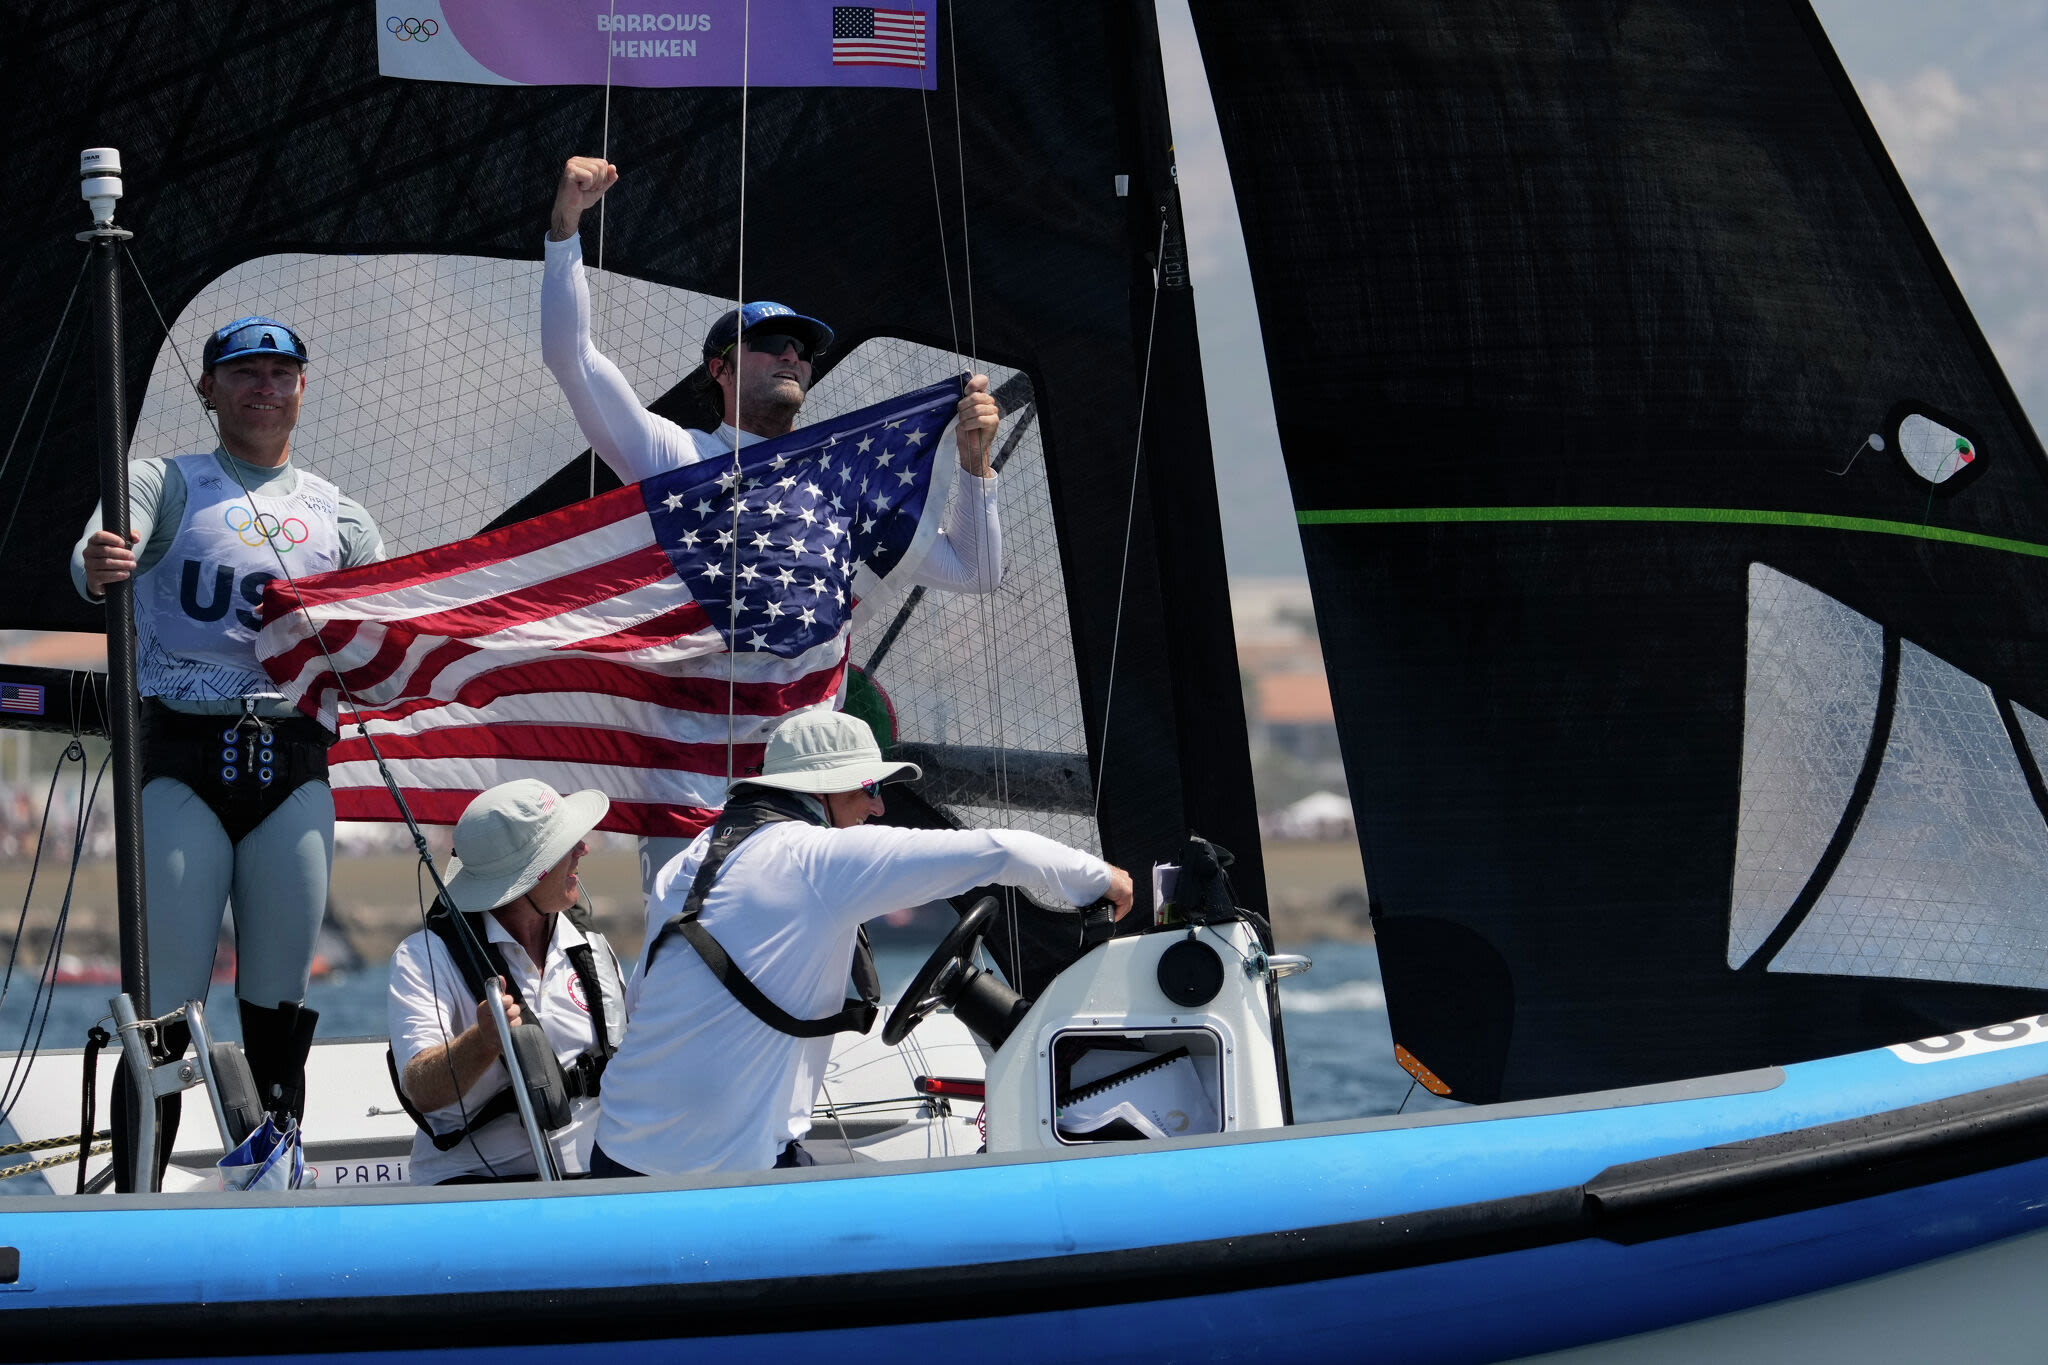 Yale's Ian Barrows leads U.S. sailing to bronze medal in men's skiff at Paris Olympics